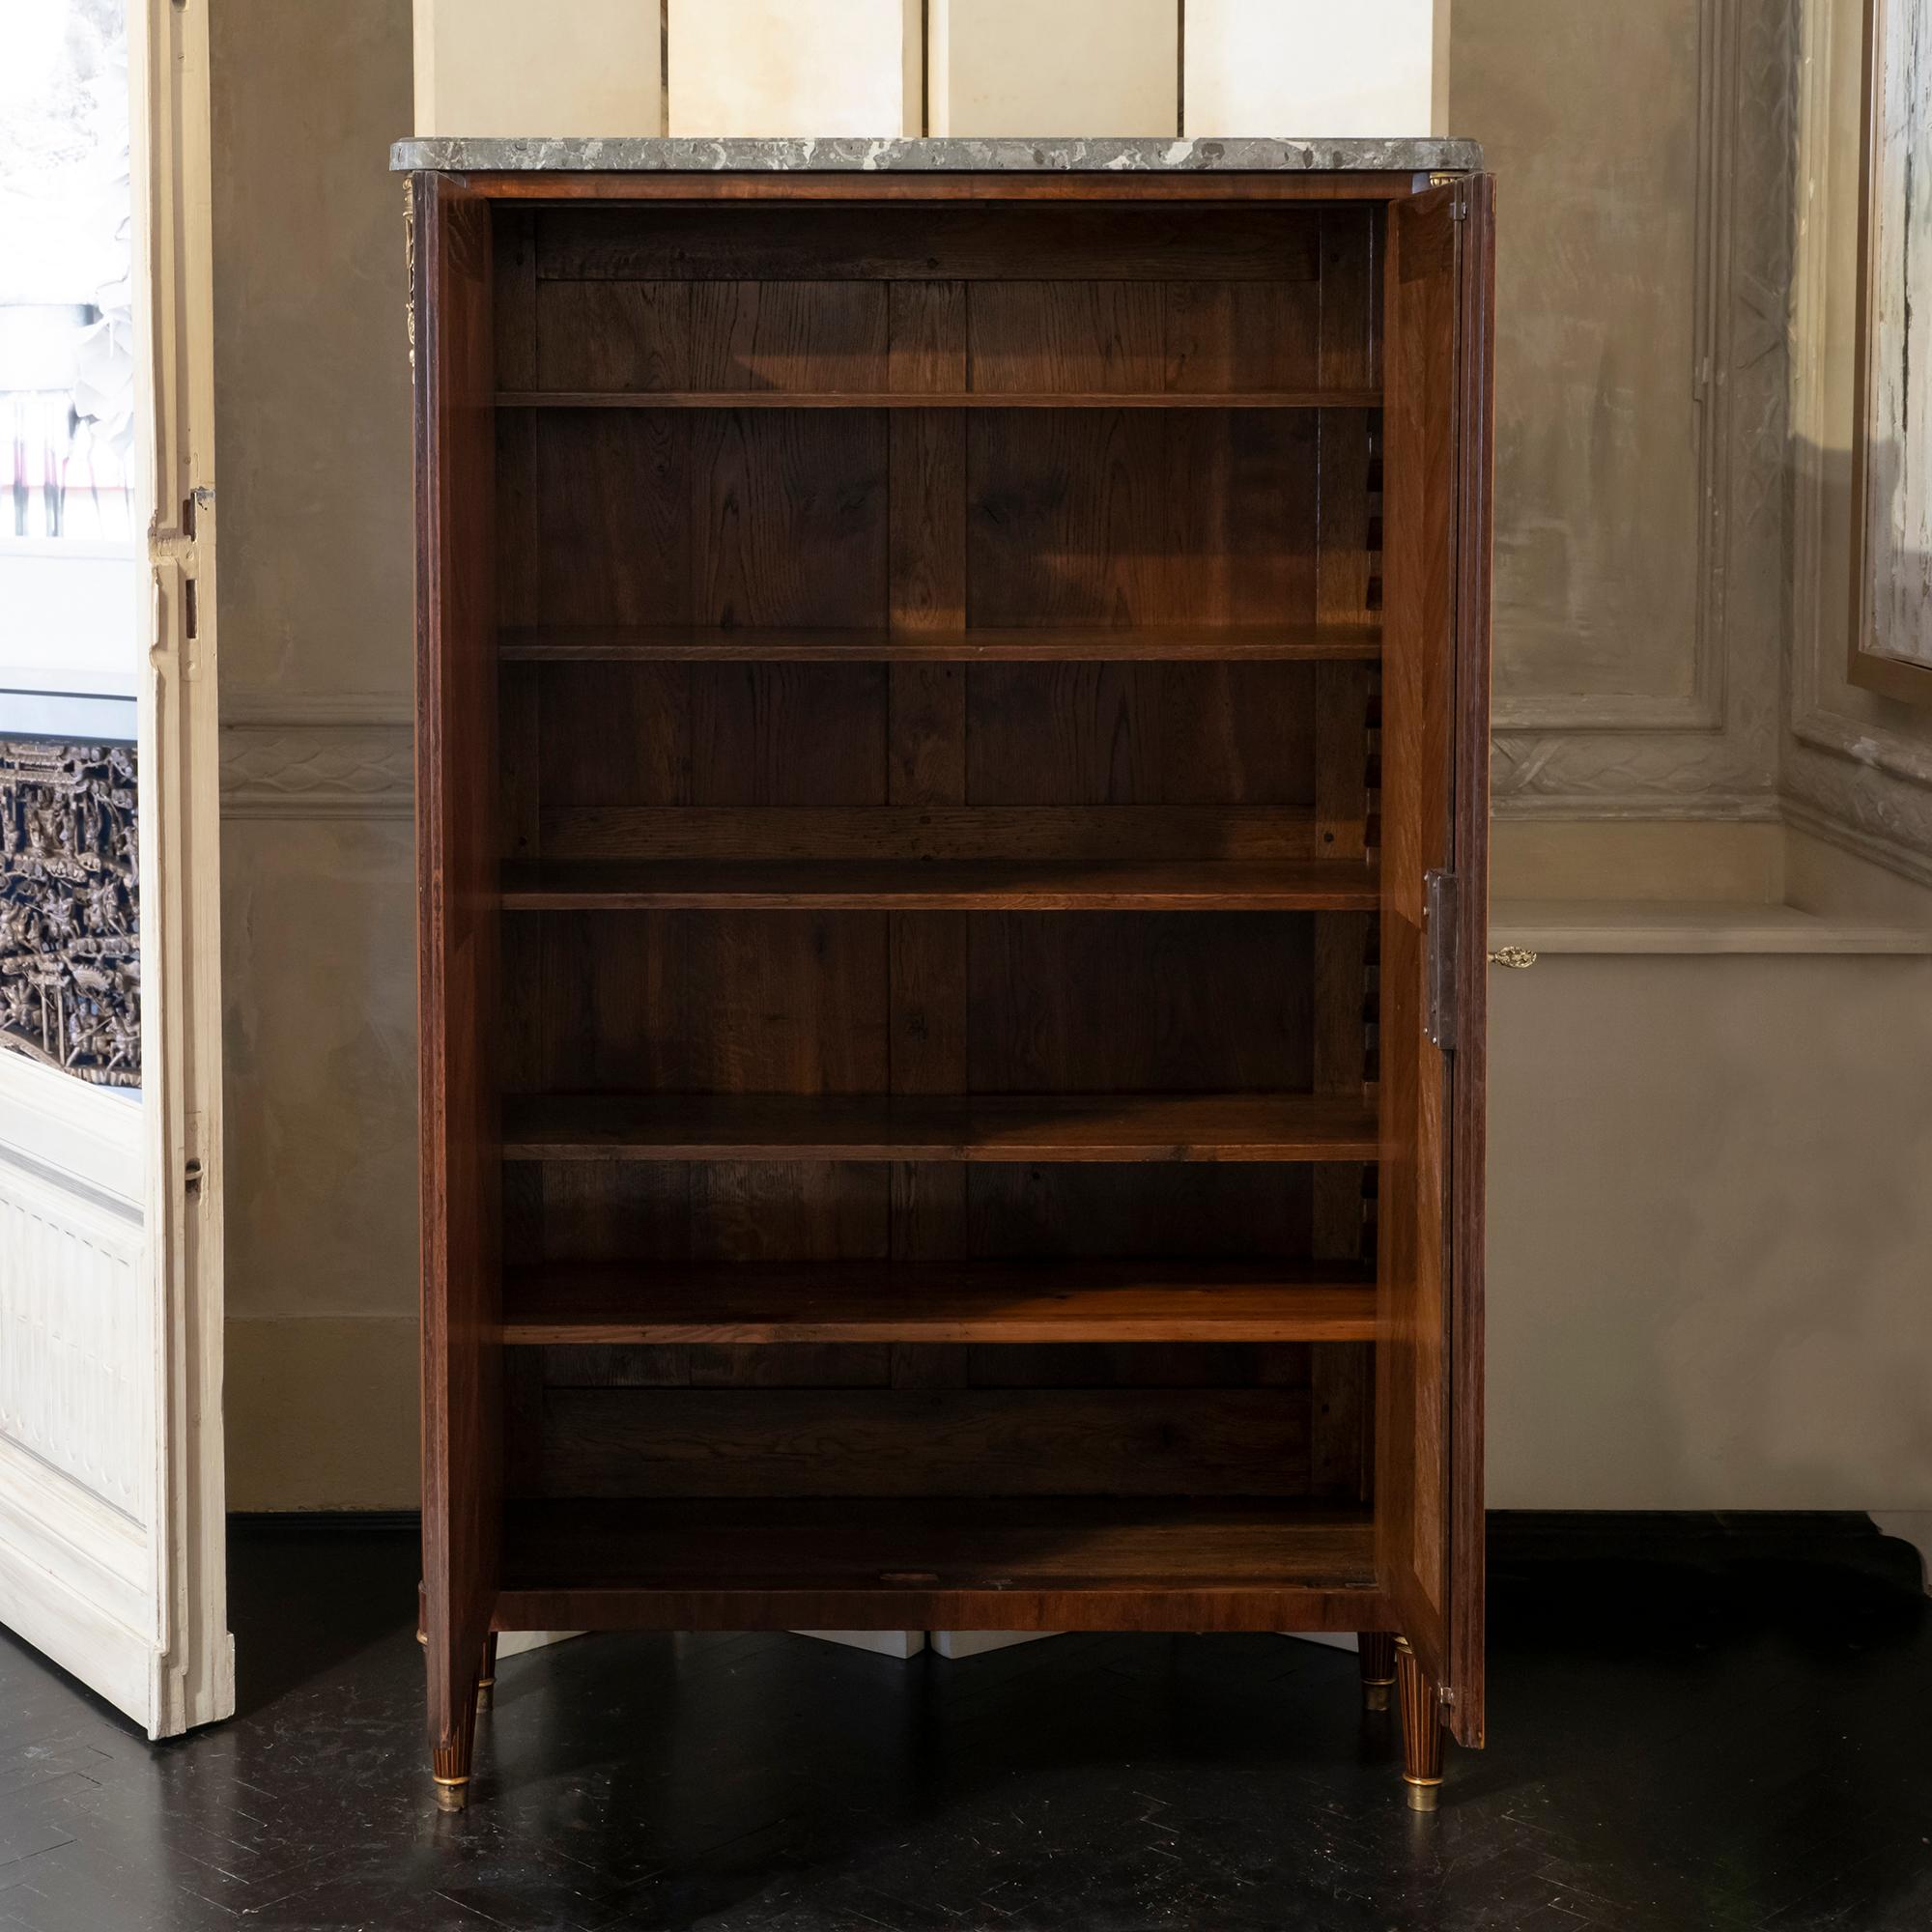 Early 19th century French tall cabinet / library geometric, contrasting-woods inlaid marquetry on the front doors and sides with decorative brass details over the fluted columns, original marble top with vintage patina and in good condition, five